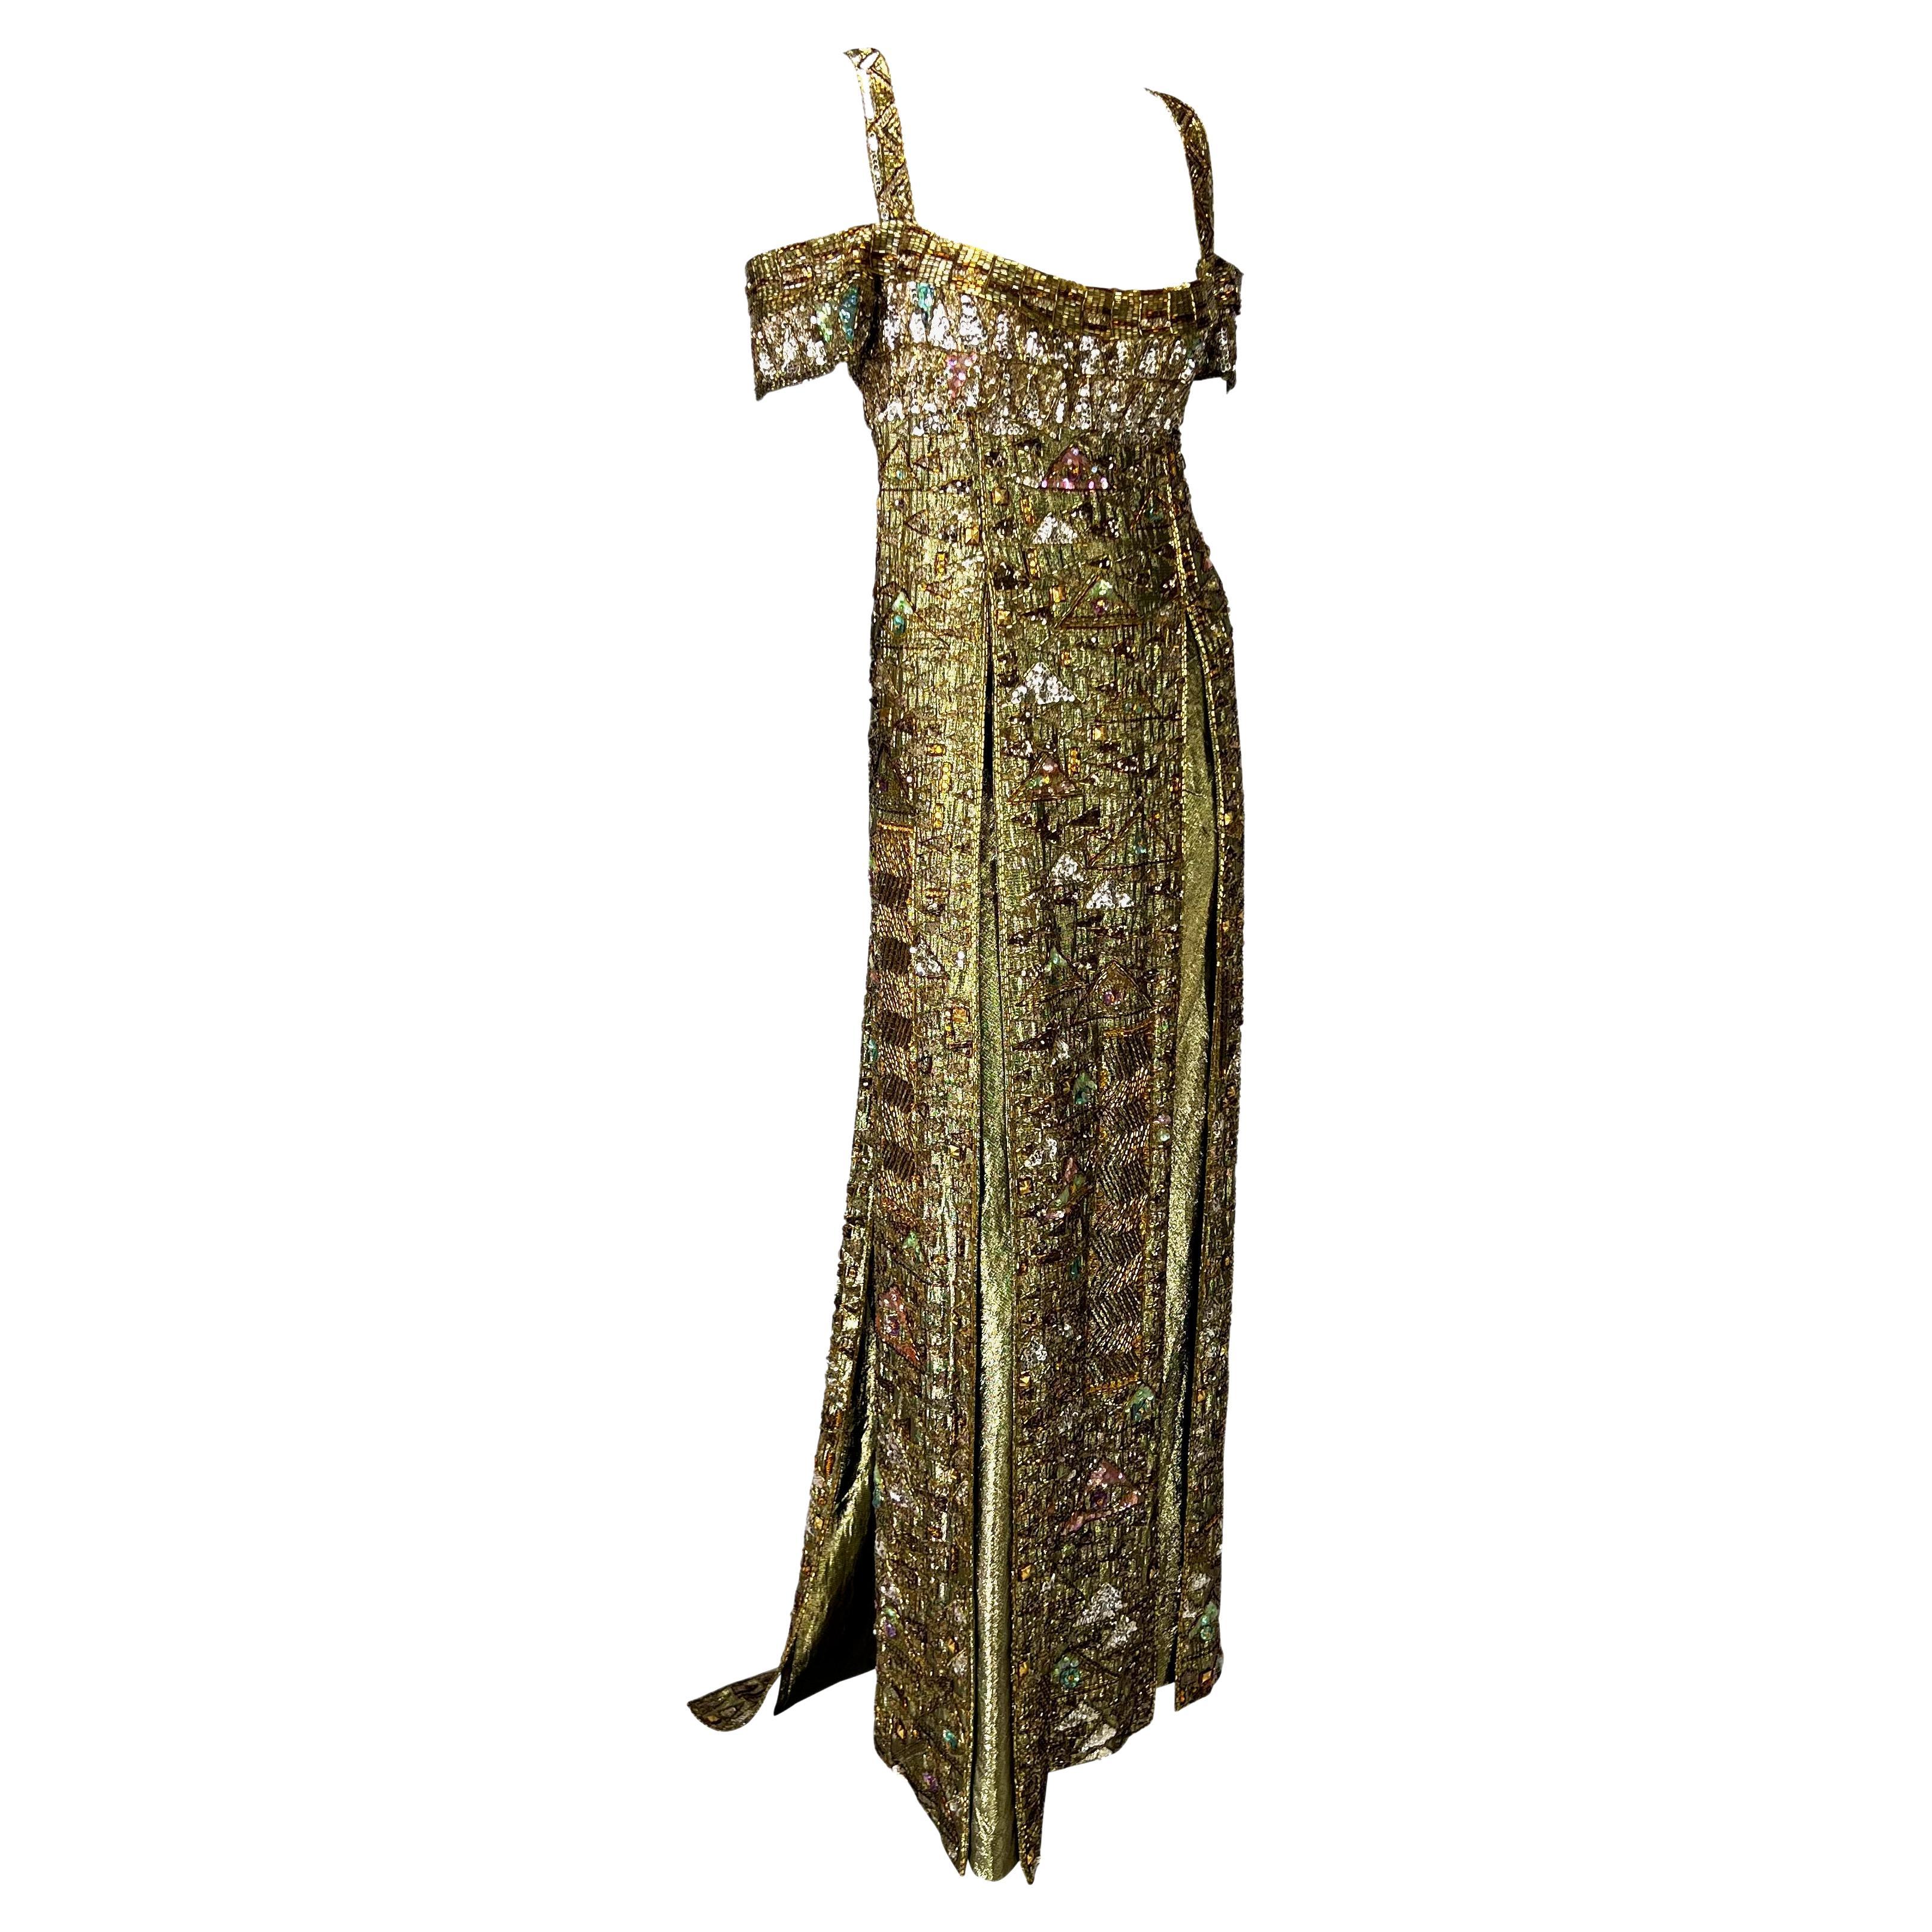 Gold Lame Dresses - 137 For Sale on 1stDibs  gold lame evening gown, vintage  gold lame dress, 70s gold lame dress